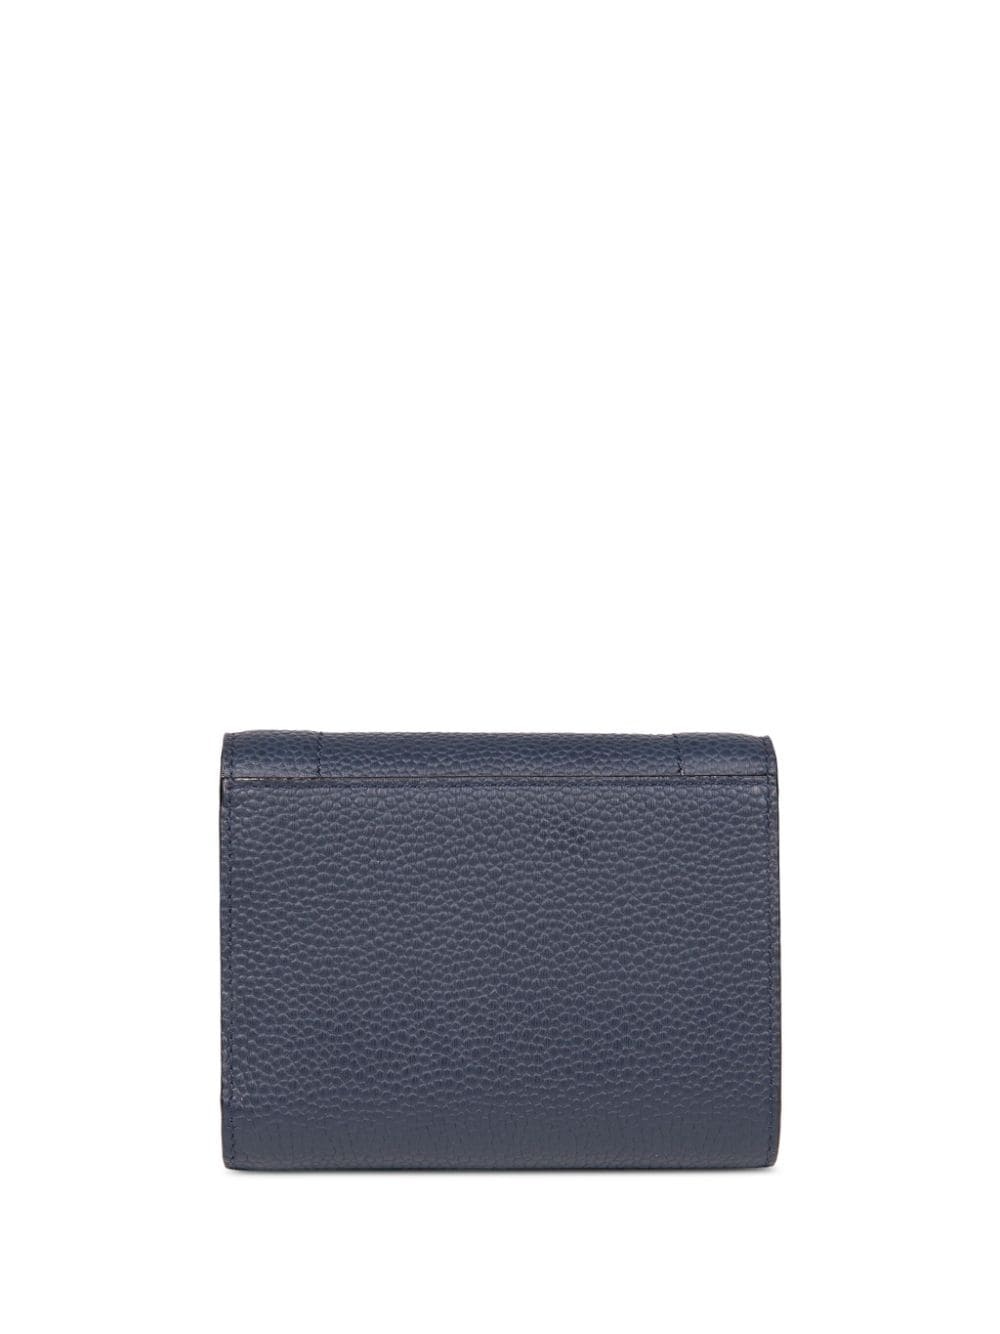 Ninon leather compact wallet - 2